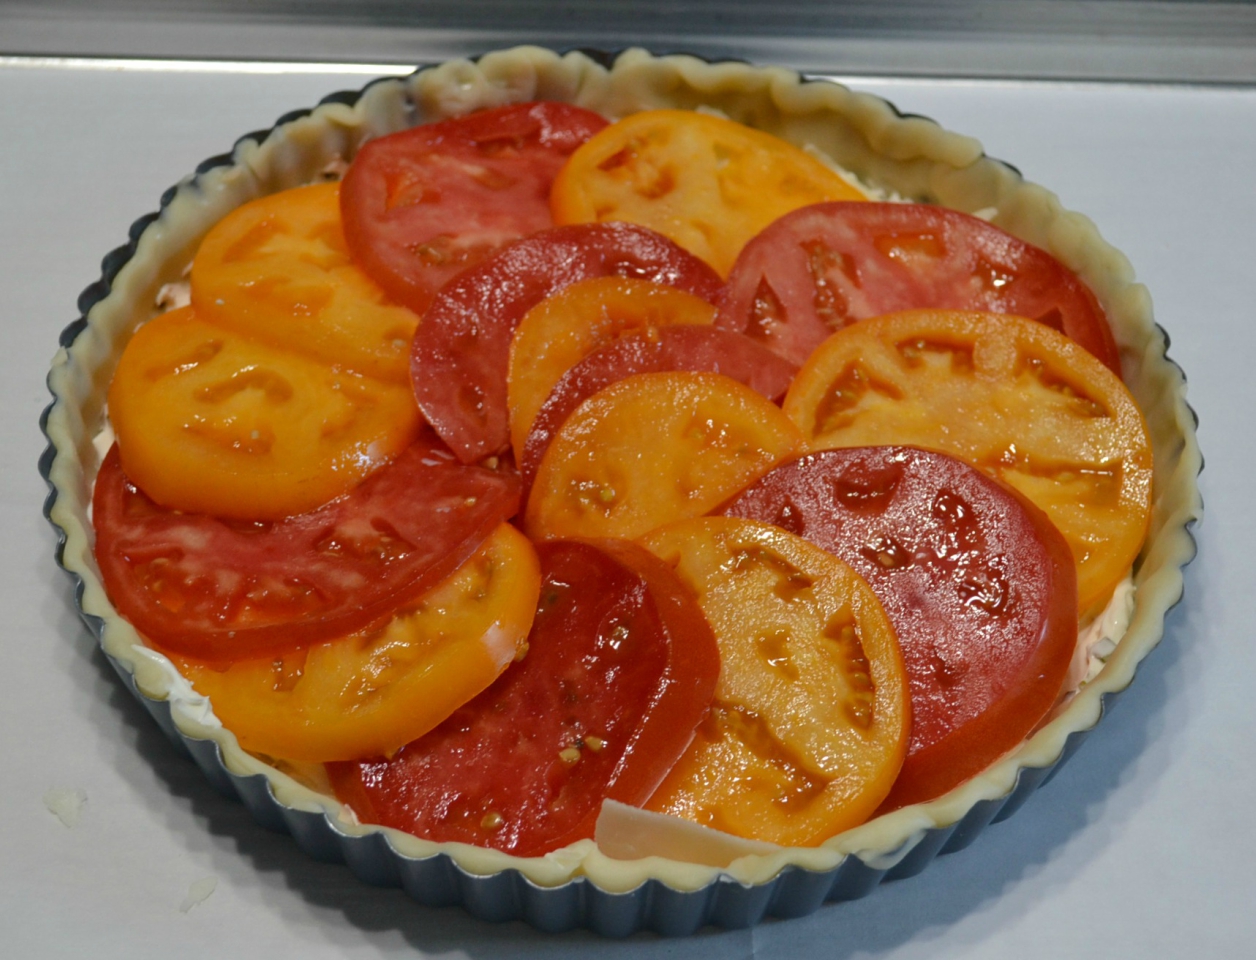 This Garden Fresh Tomato Bacon Tart is a crust filled with chive & onion cream cheese,fontina,fresh tomatoes,bacon and seasonings. Perfect for summertime eating